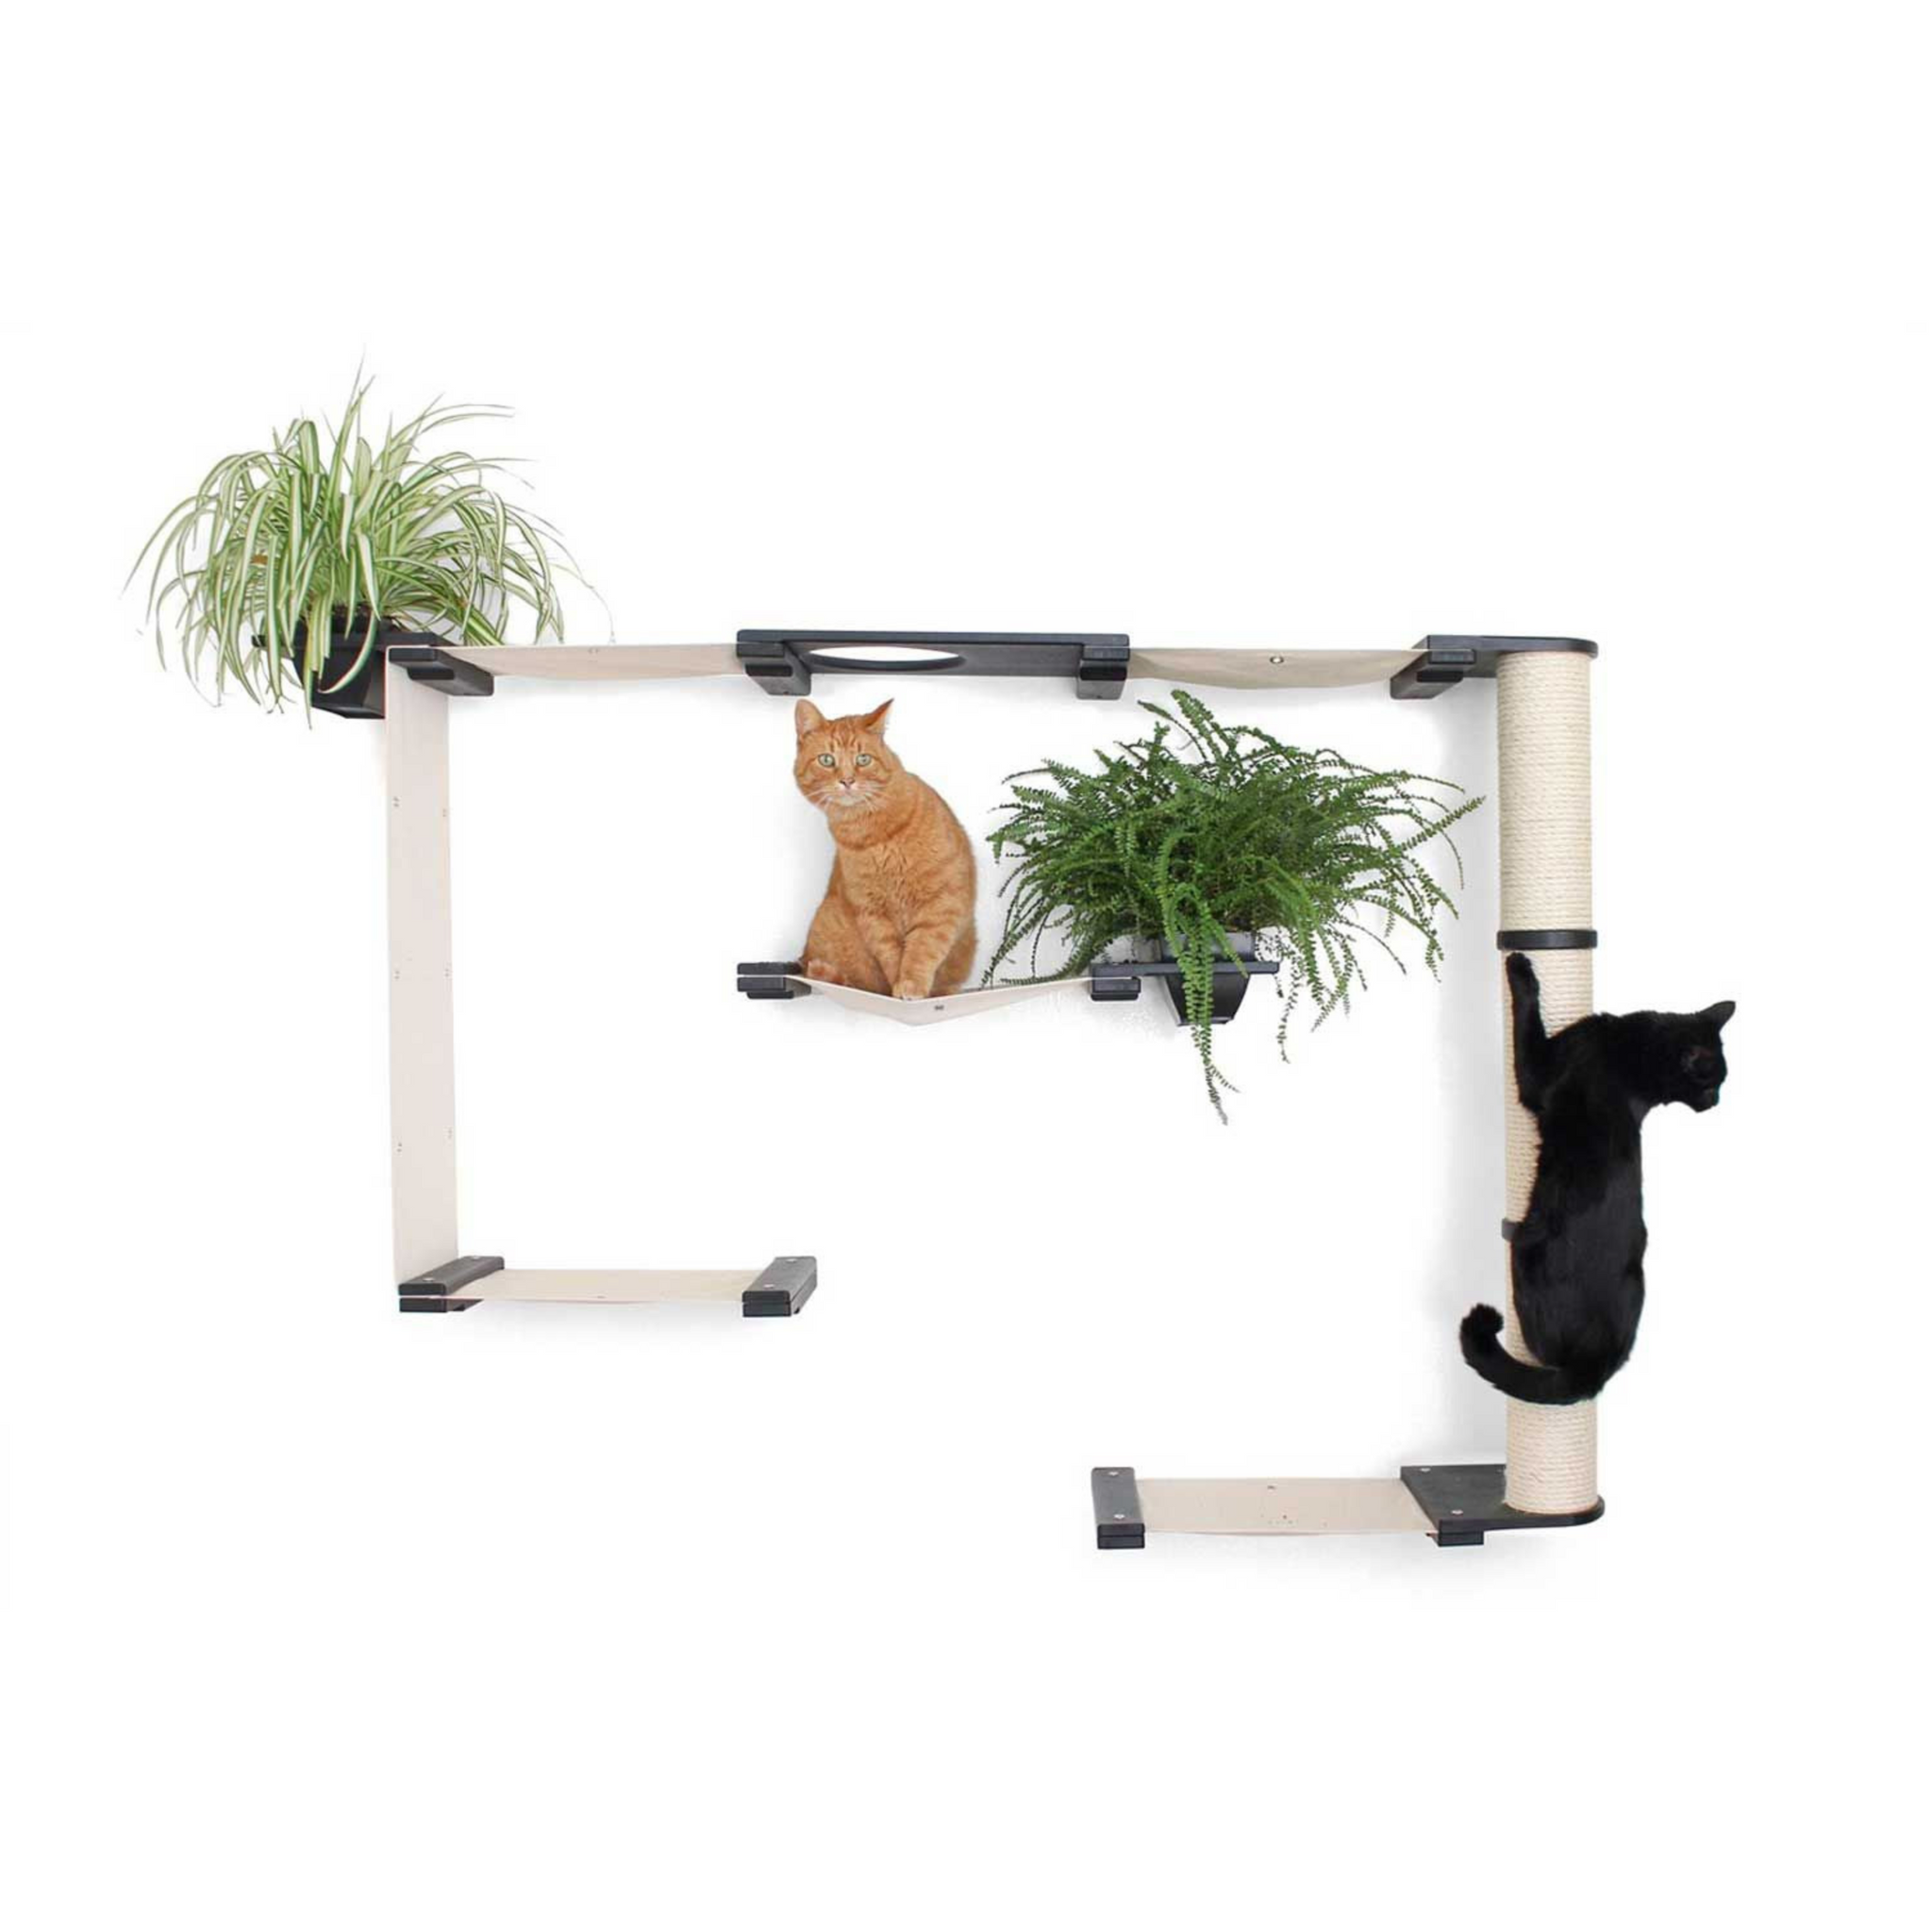 The Gardens Cat Condo (Wall-Mounted Cat Tree) by Catastrophic Creations